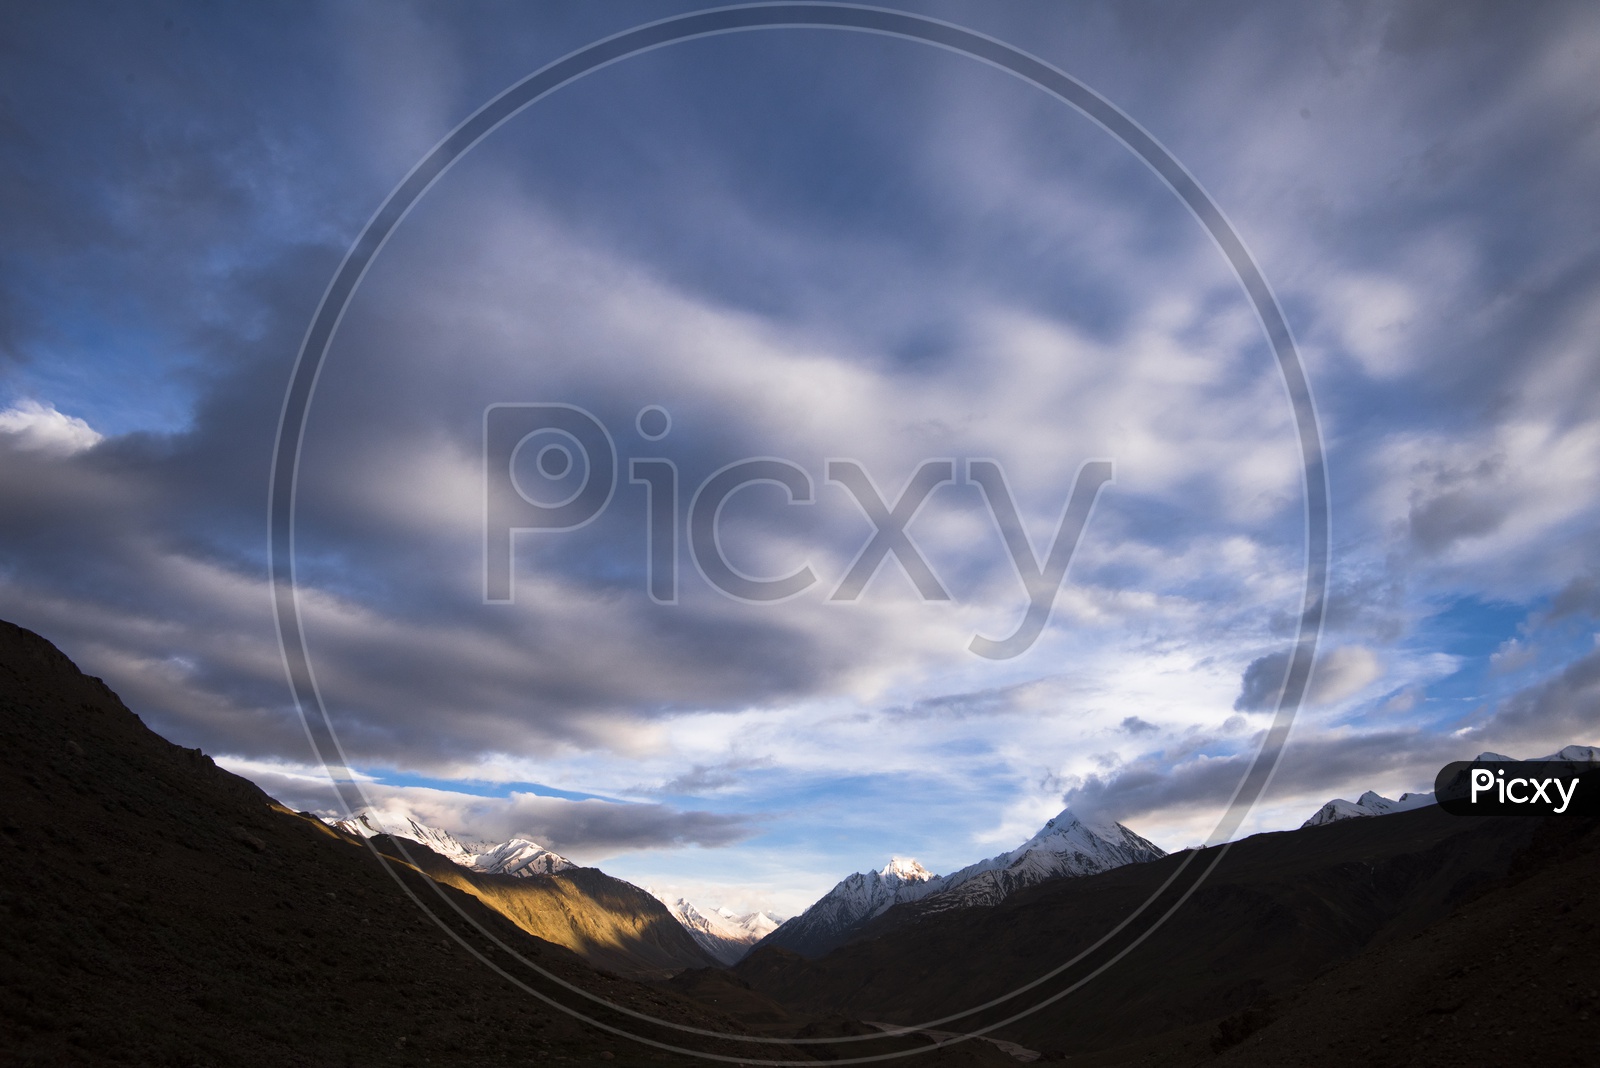 A River Valley Views Of Leh / Ladakh with Clouds and Mountains in Backdrop